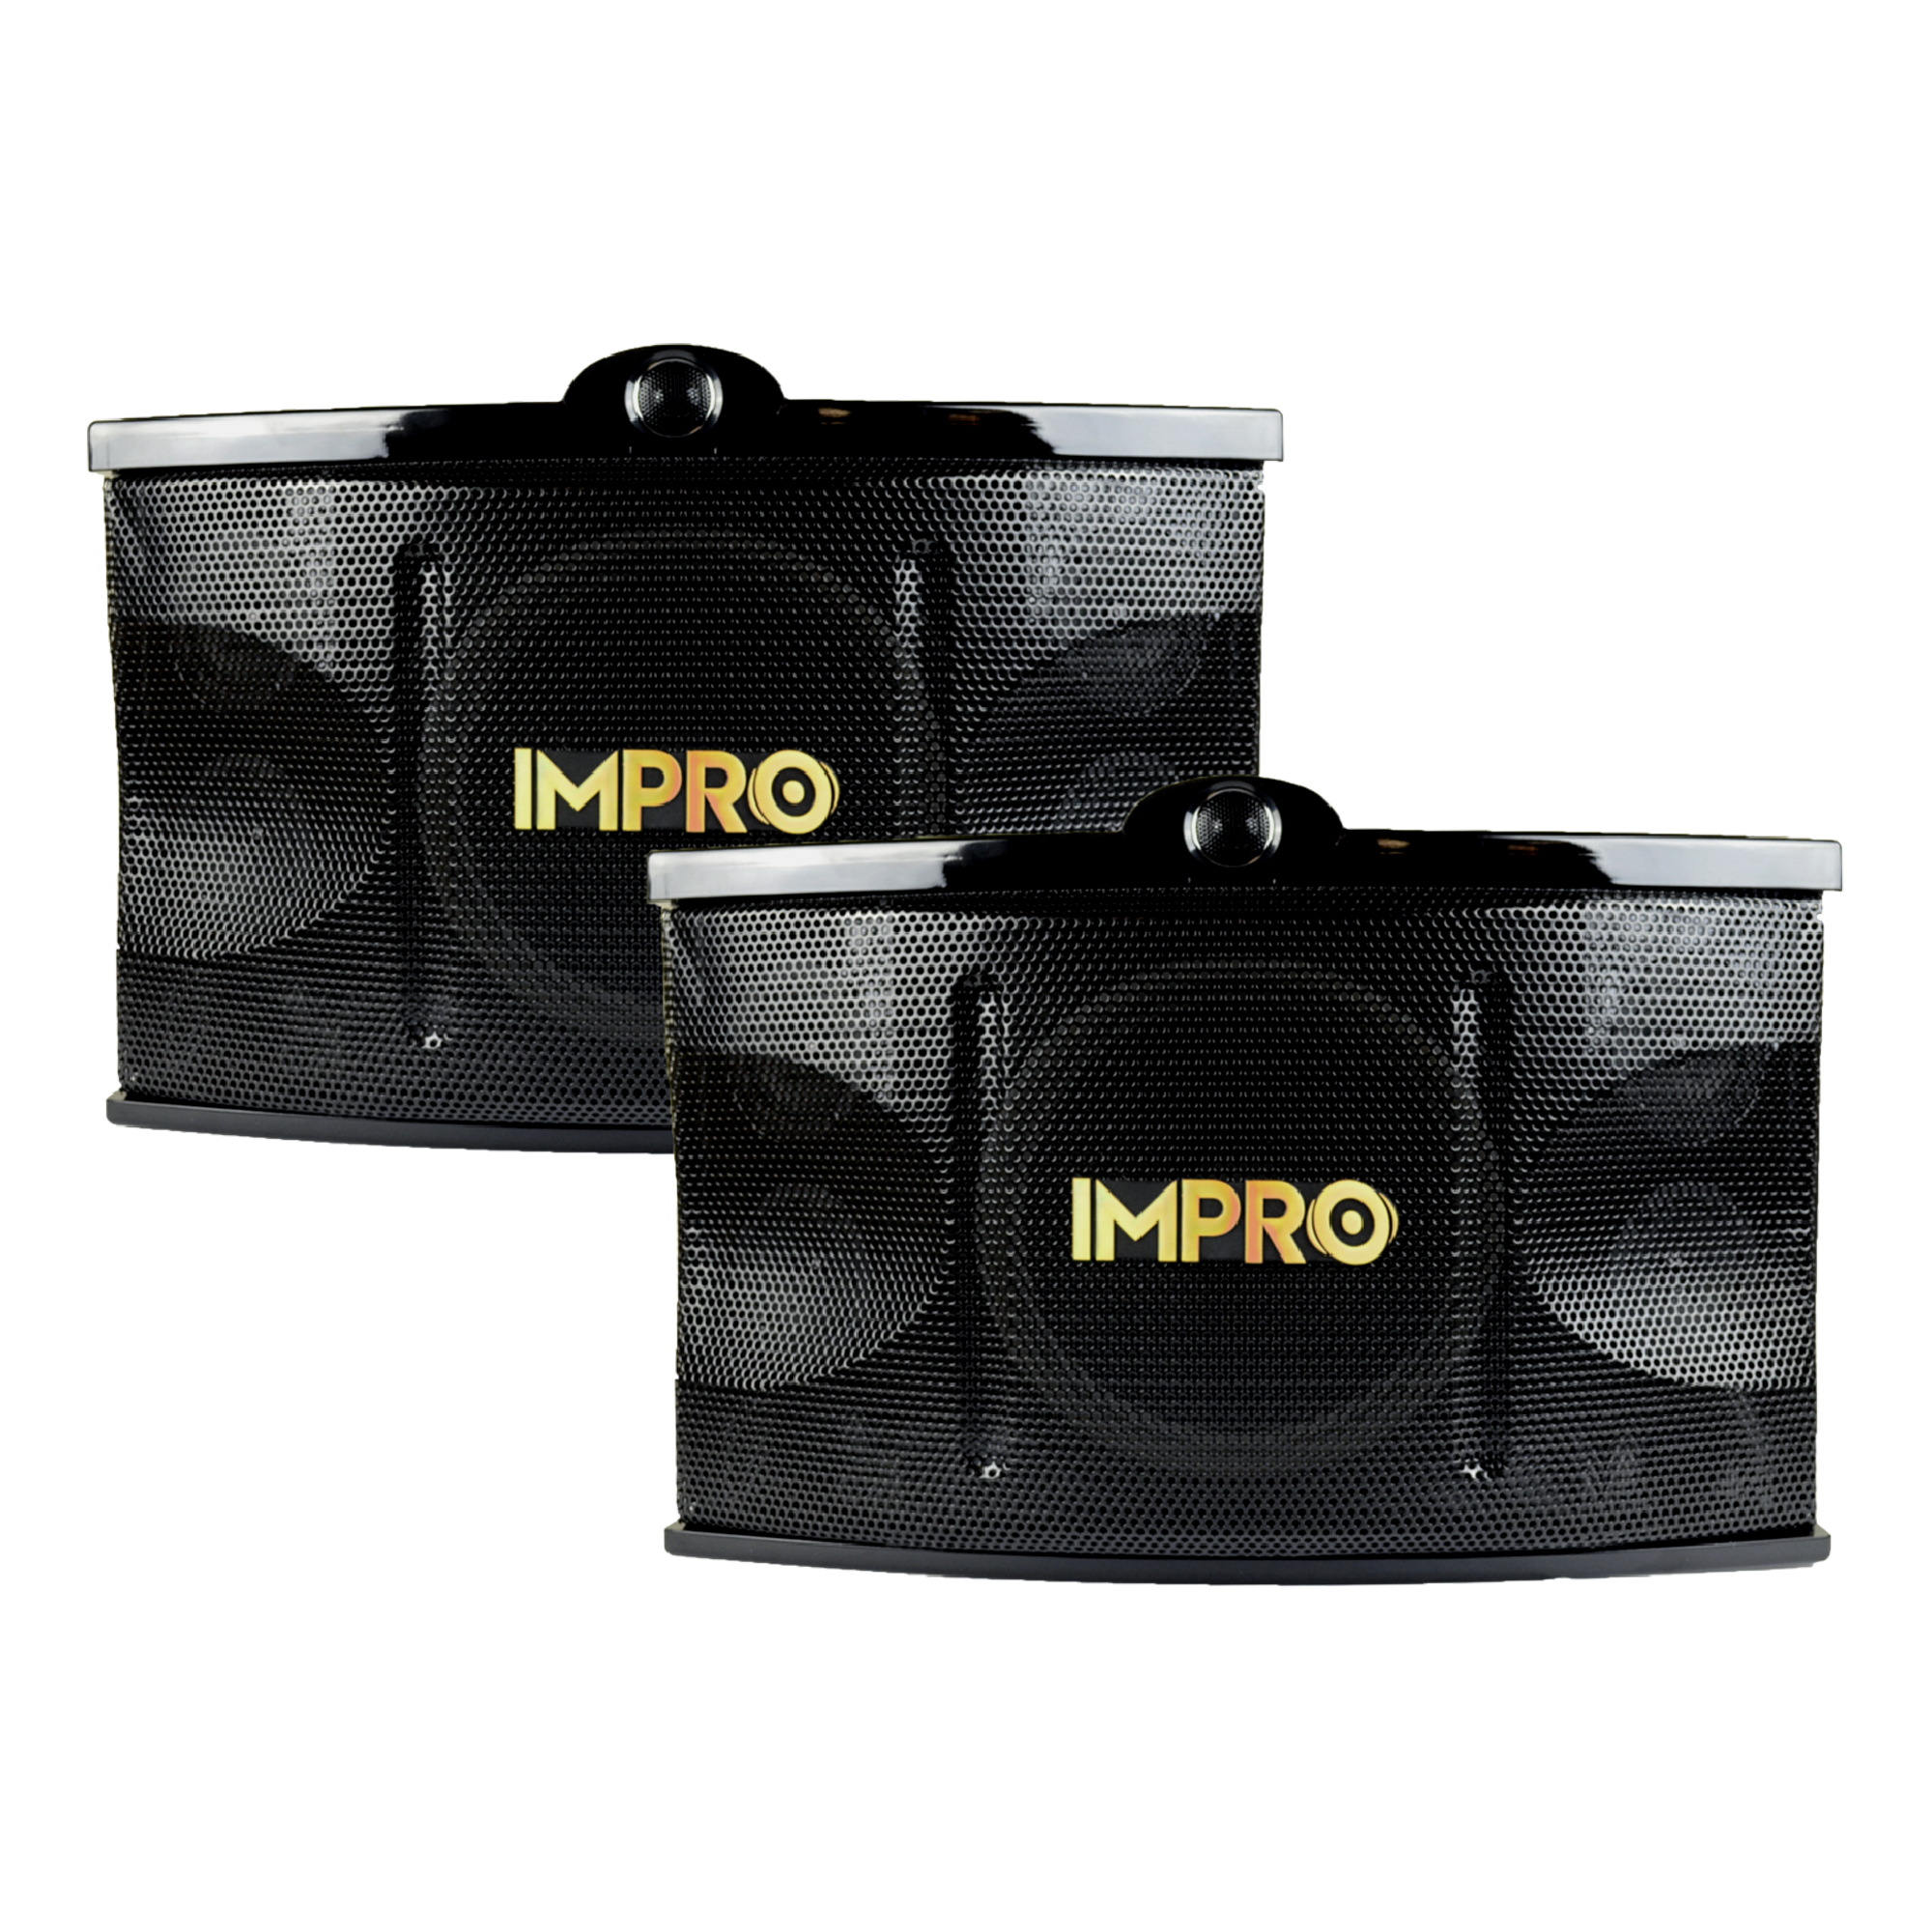 ImPro Epic Party Bundle 1 Plus with Mixing Amplifier, Speakers, Subwoofer, Microphones, and Accessories (6 Items)